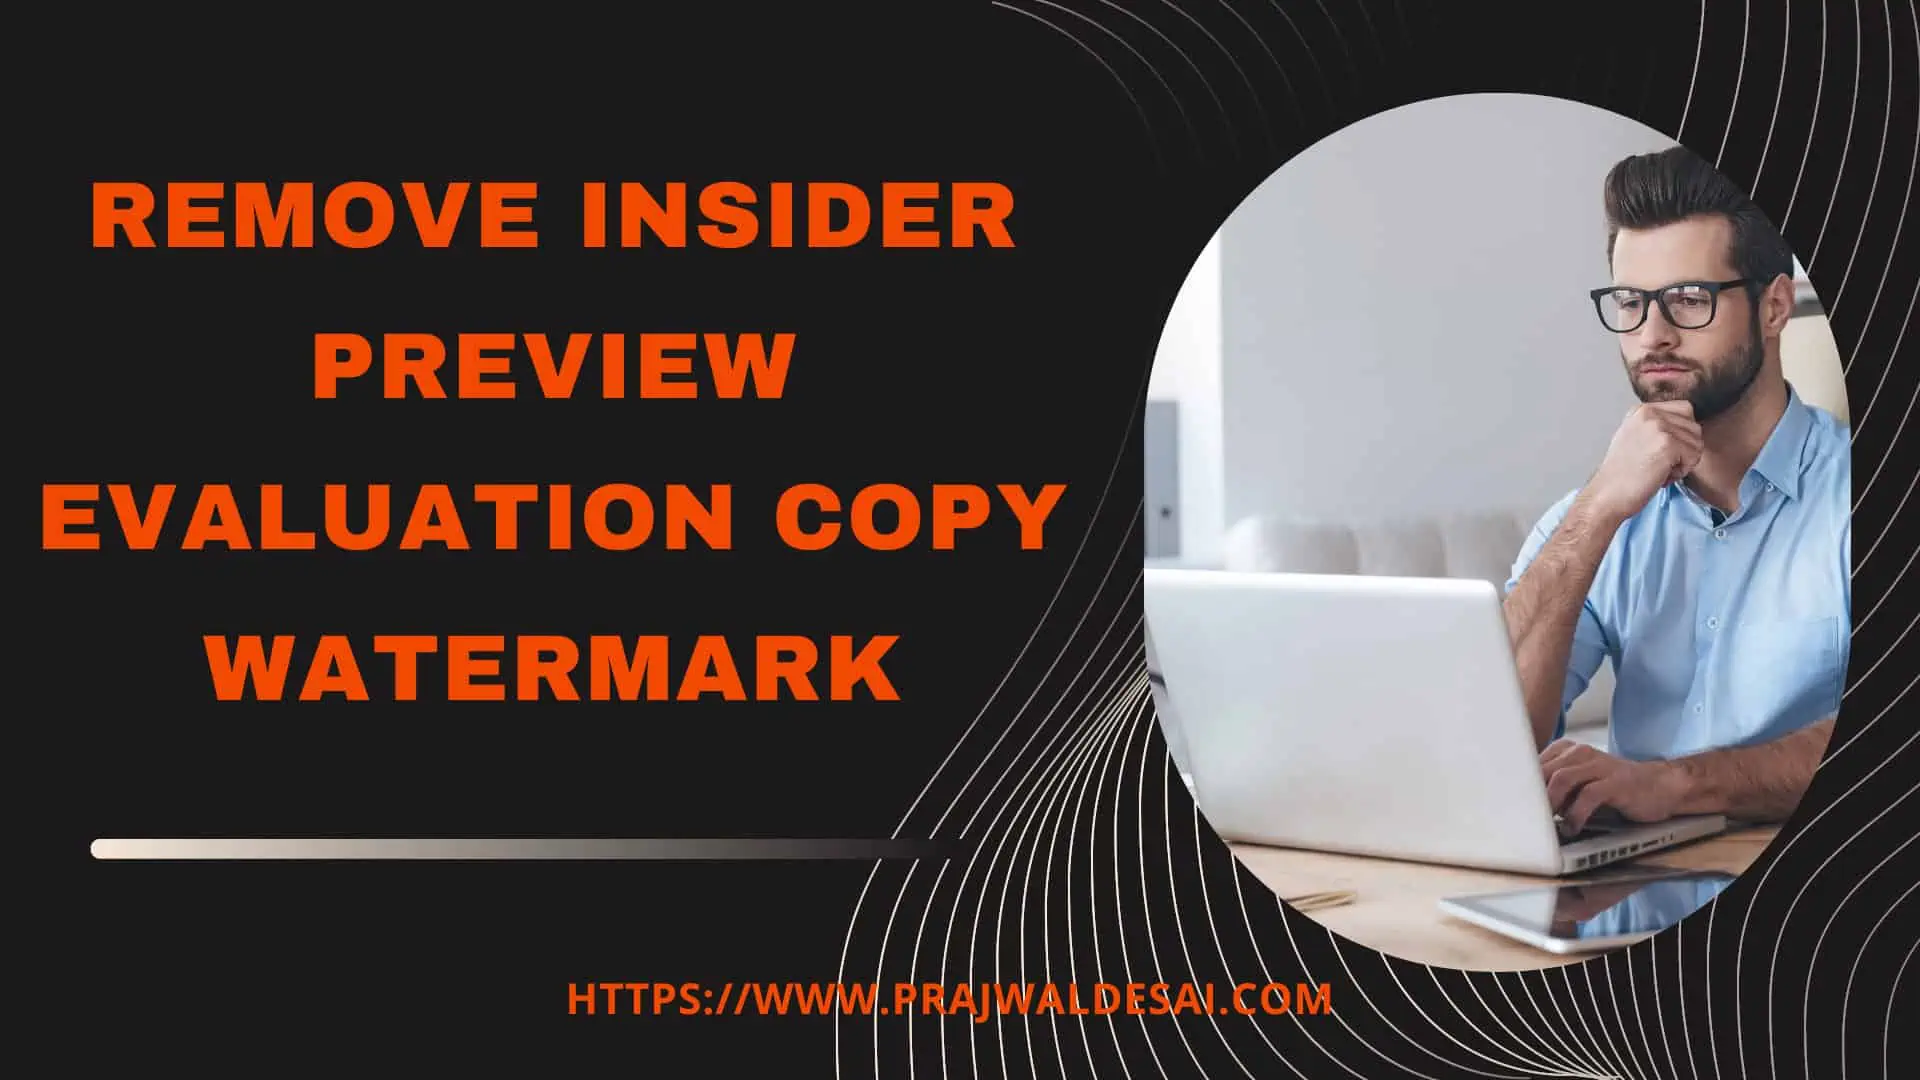 Remove Insider Preview Evaluation Copy Watermark